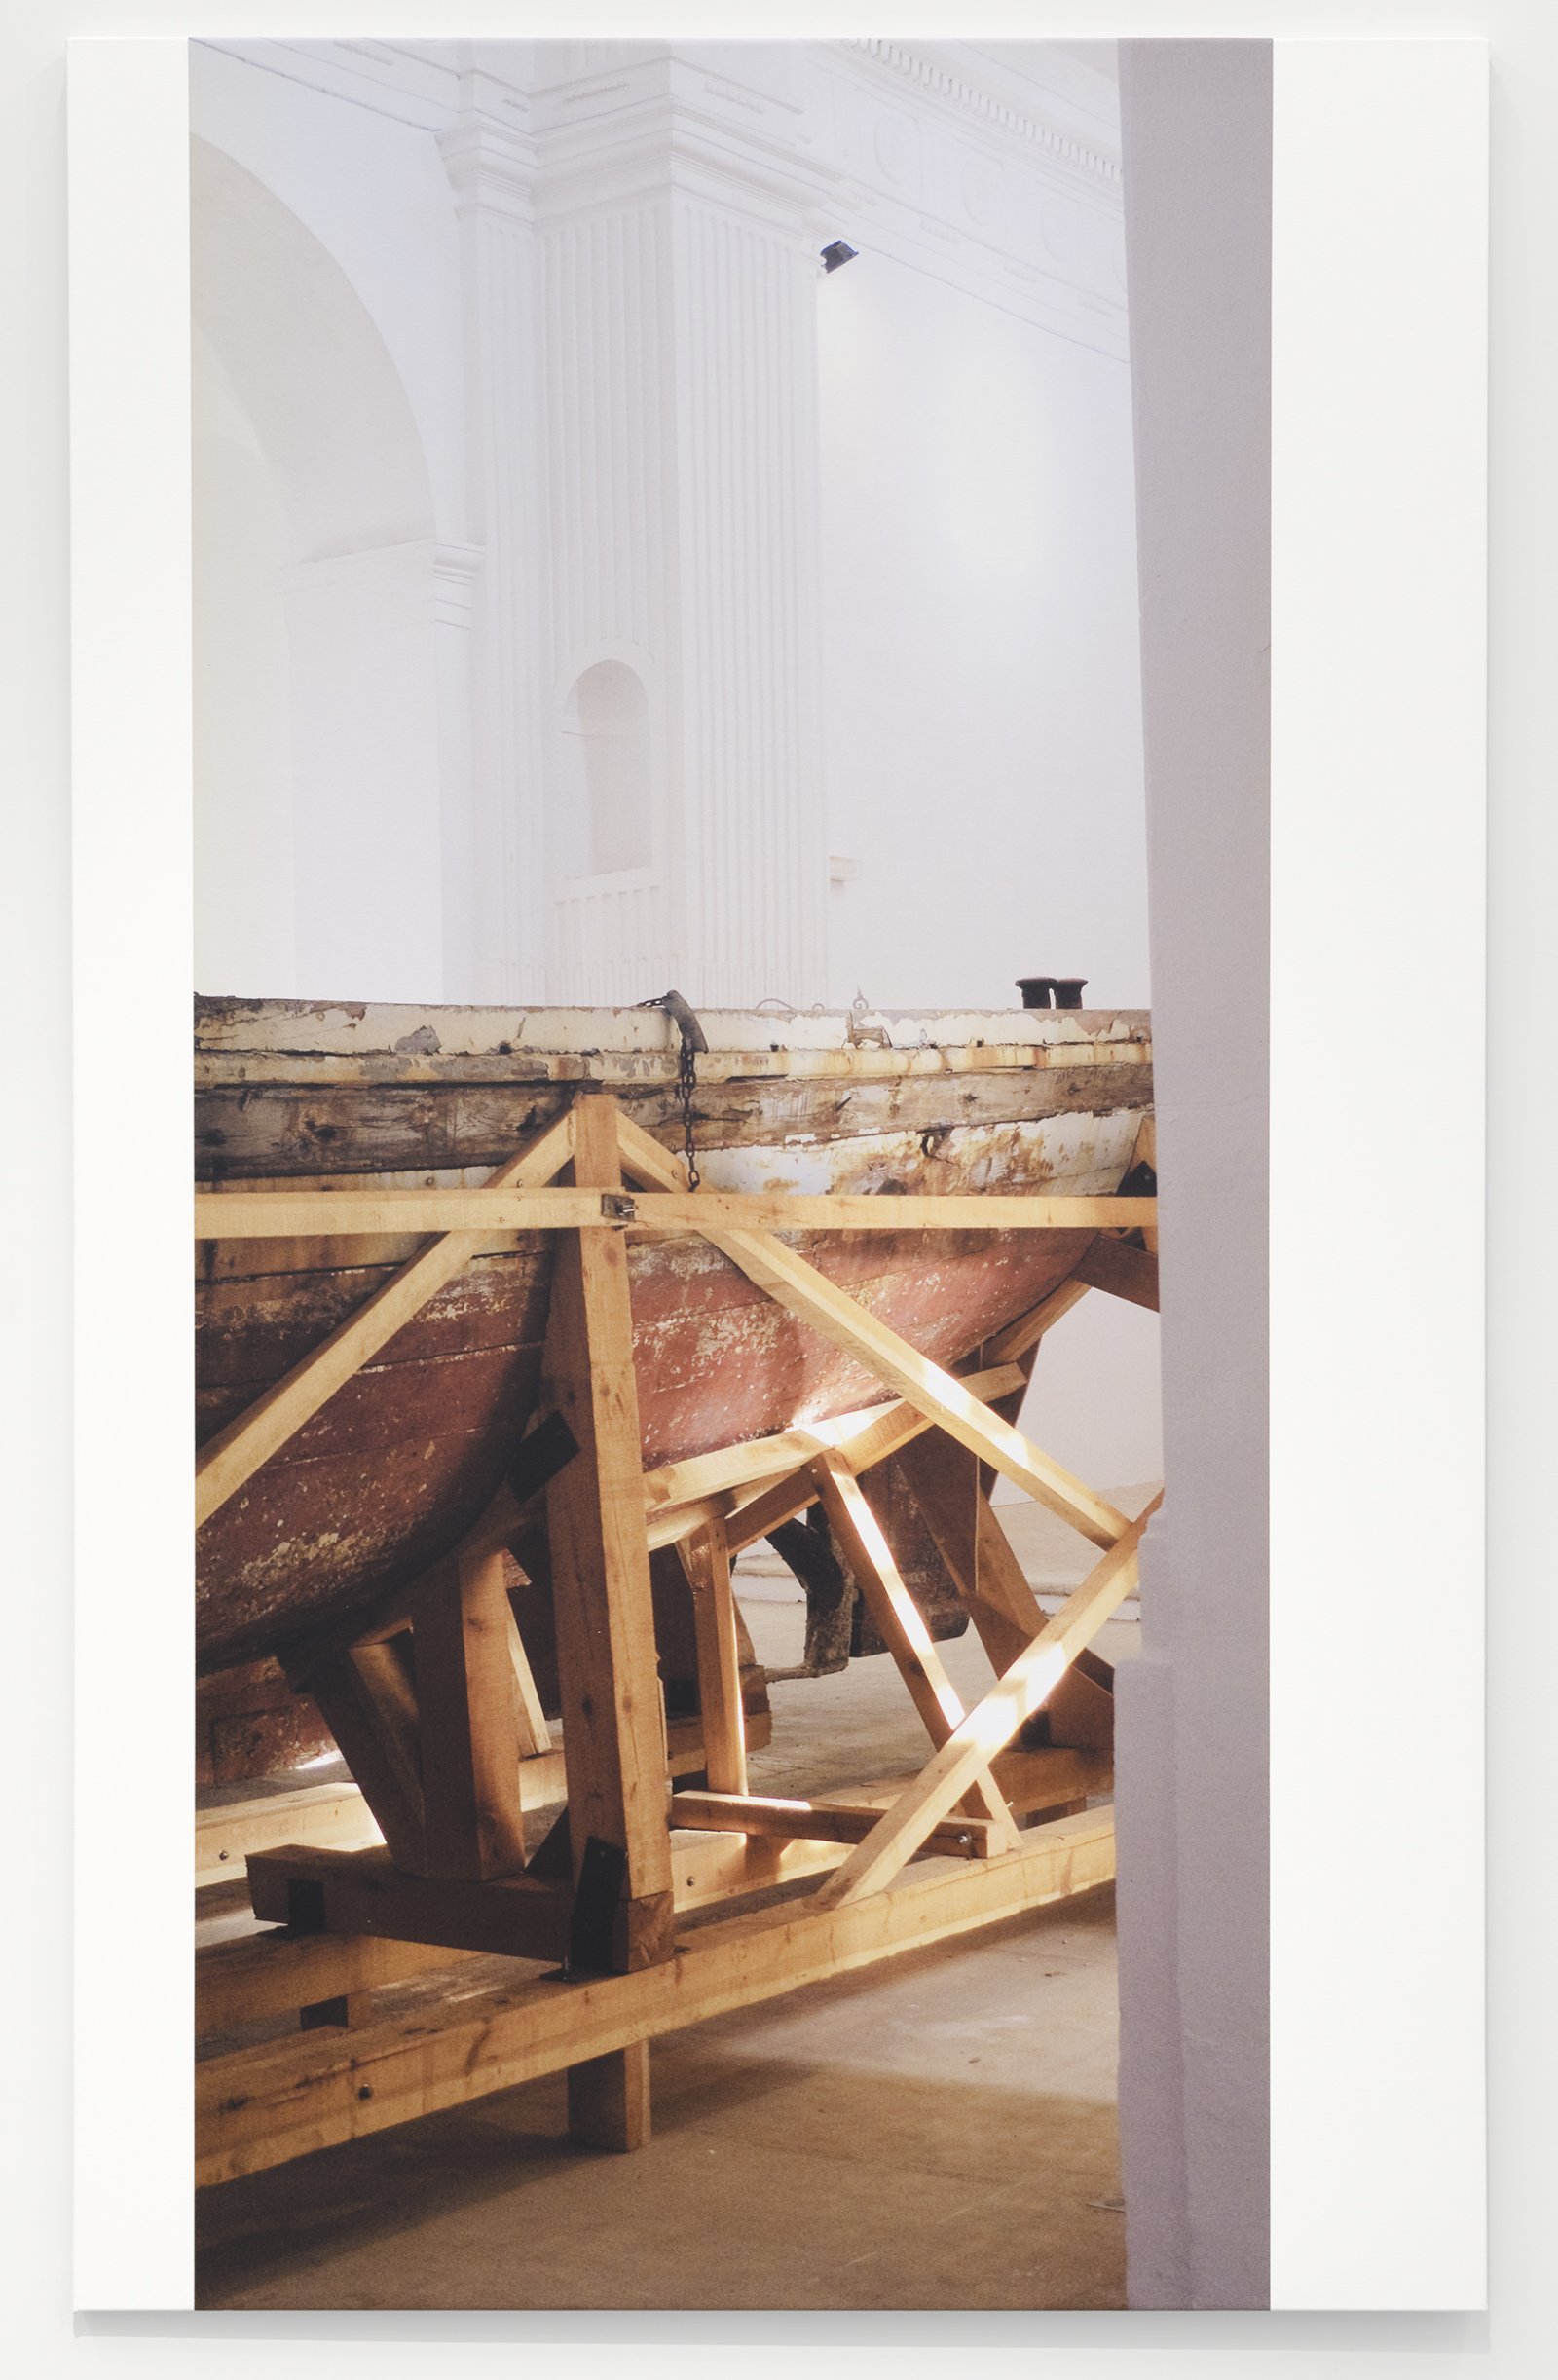 ​Ian Wallace,​ Shipwreck (After Naufragio con Spettatore by Claudio Parmiggiani) I–IV, 2010, photolaminate with acrylic on canvas, 4 parts, each 96 x 60 in. (244 x 152 cm)​ by Ian Wallace